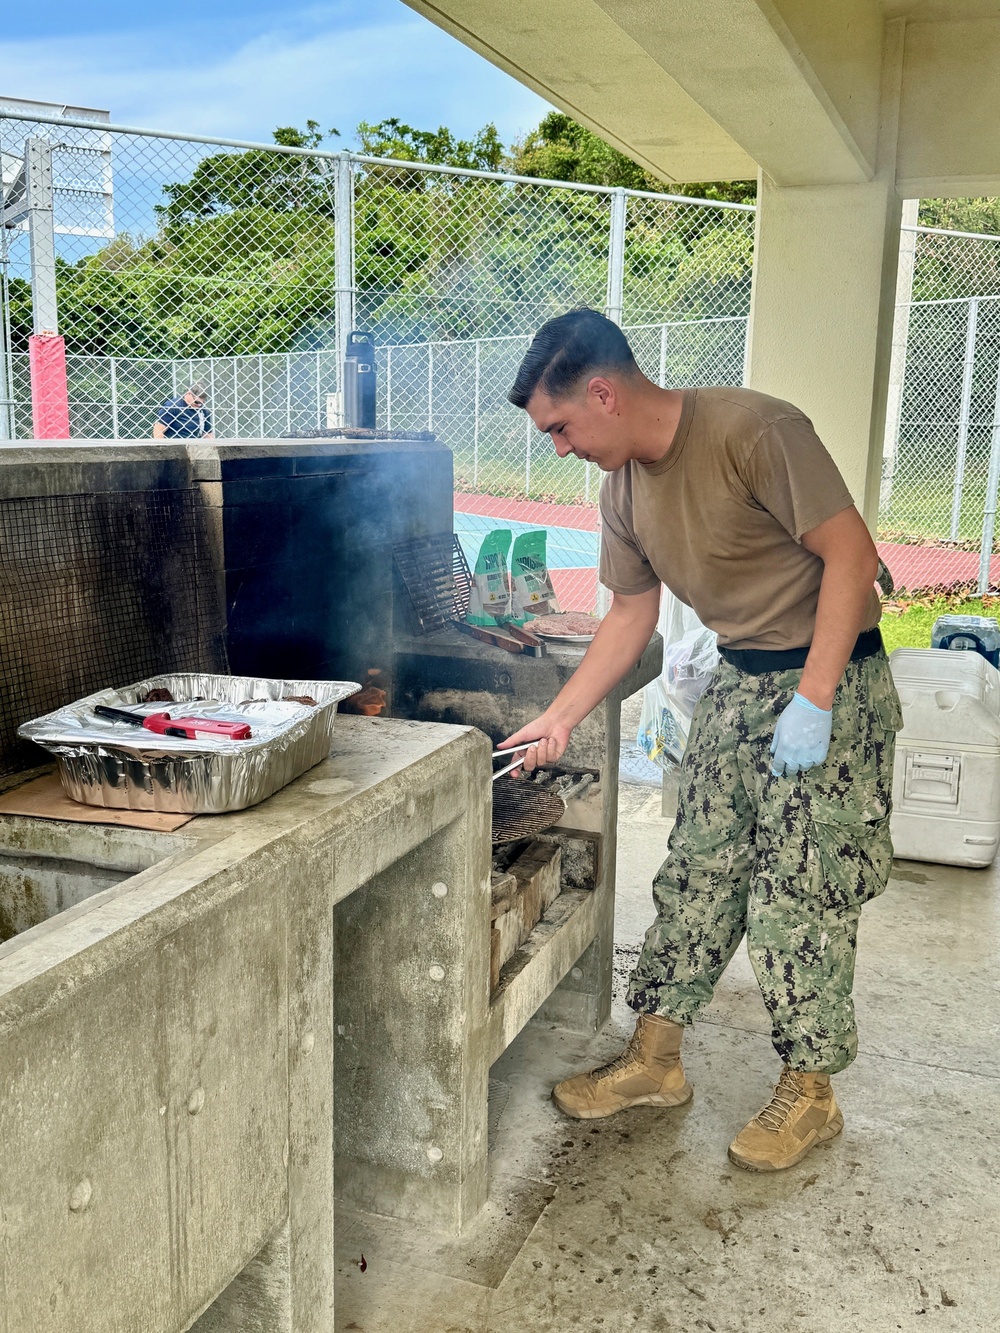 U.S. Naval Hospital Okinawa is Laying the Keel and Developing Enlisted Leaders